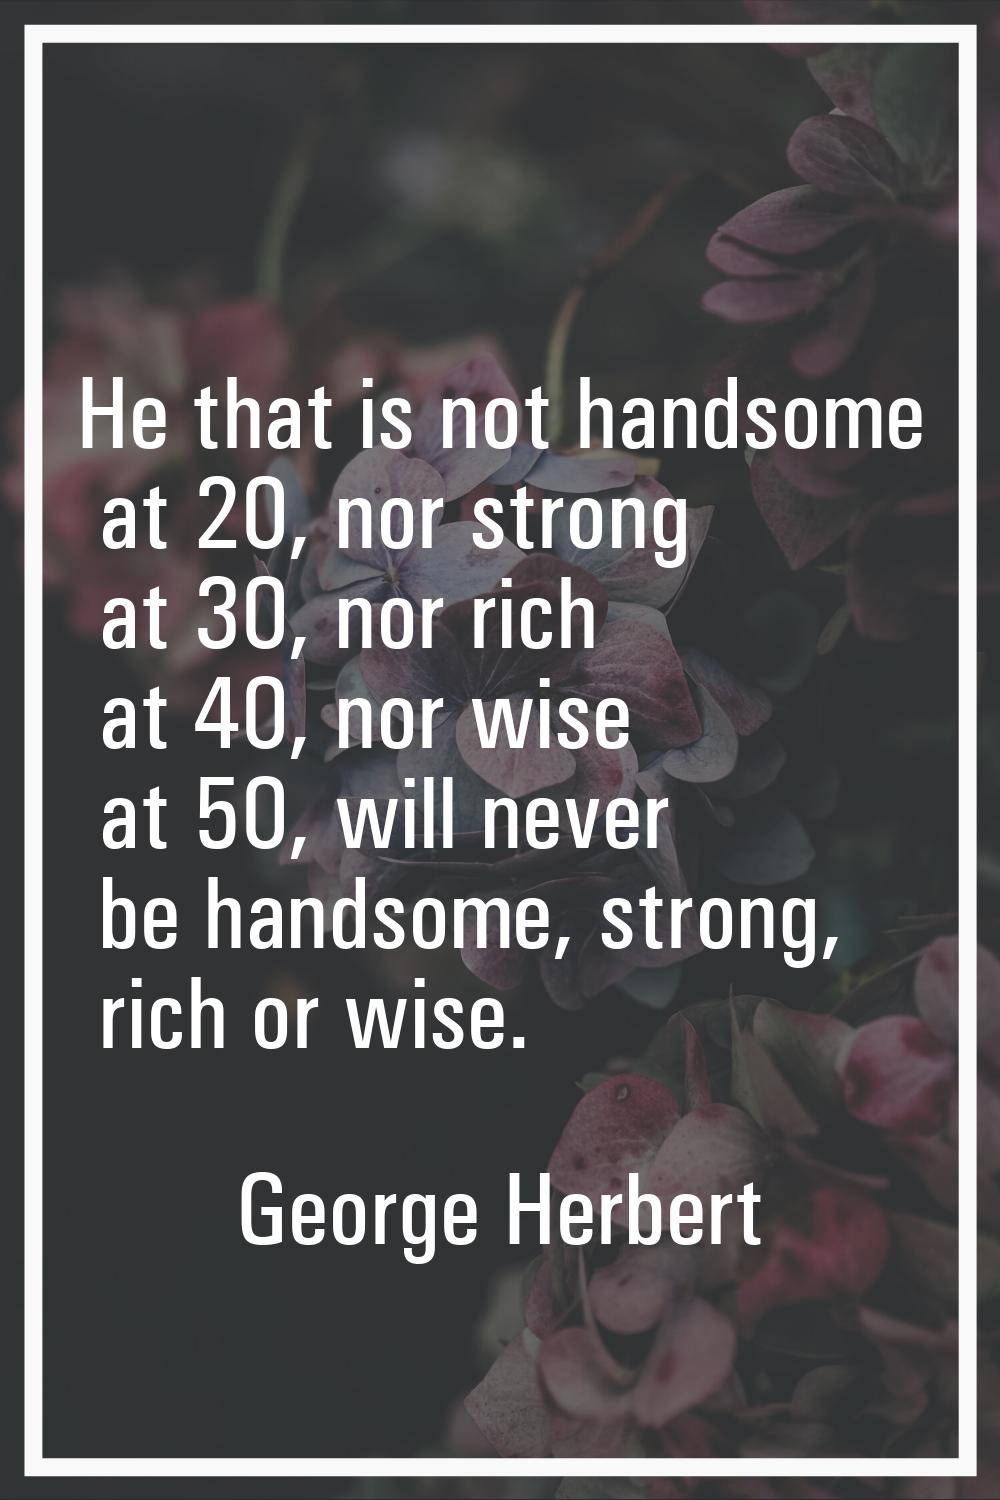 He that is not handsome at 20, nor strong at 30, nor rich at 40, nor wise at 50, will never be hand